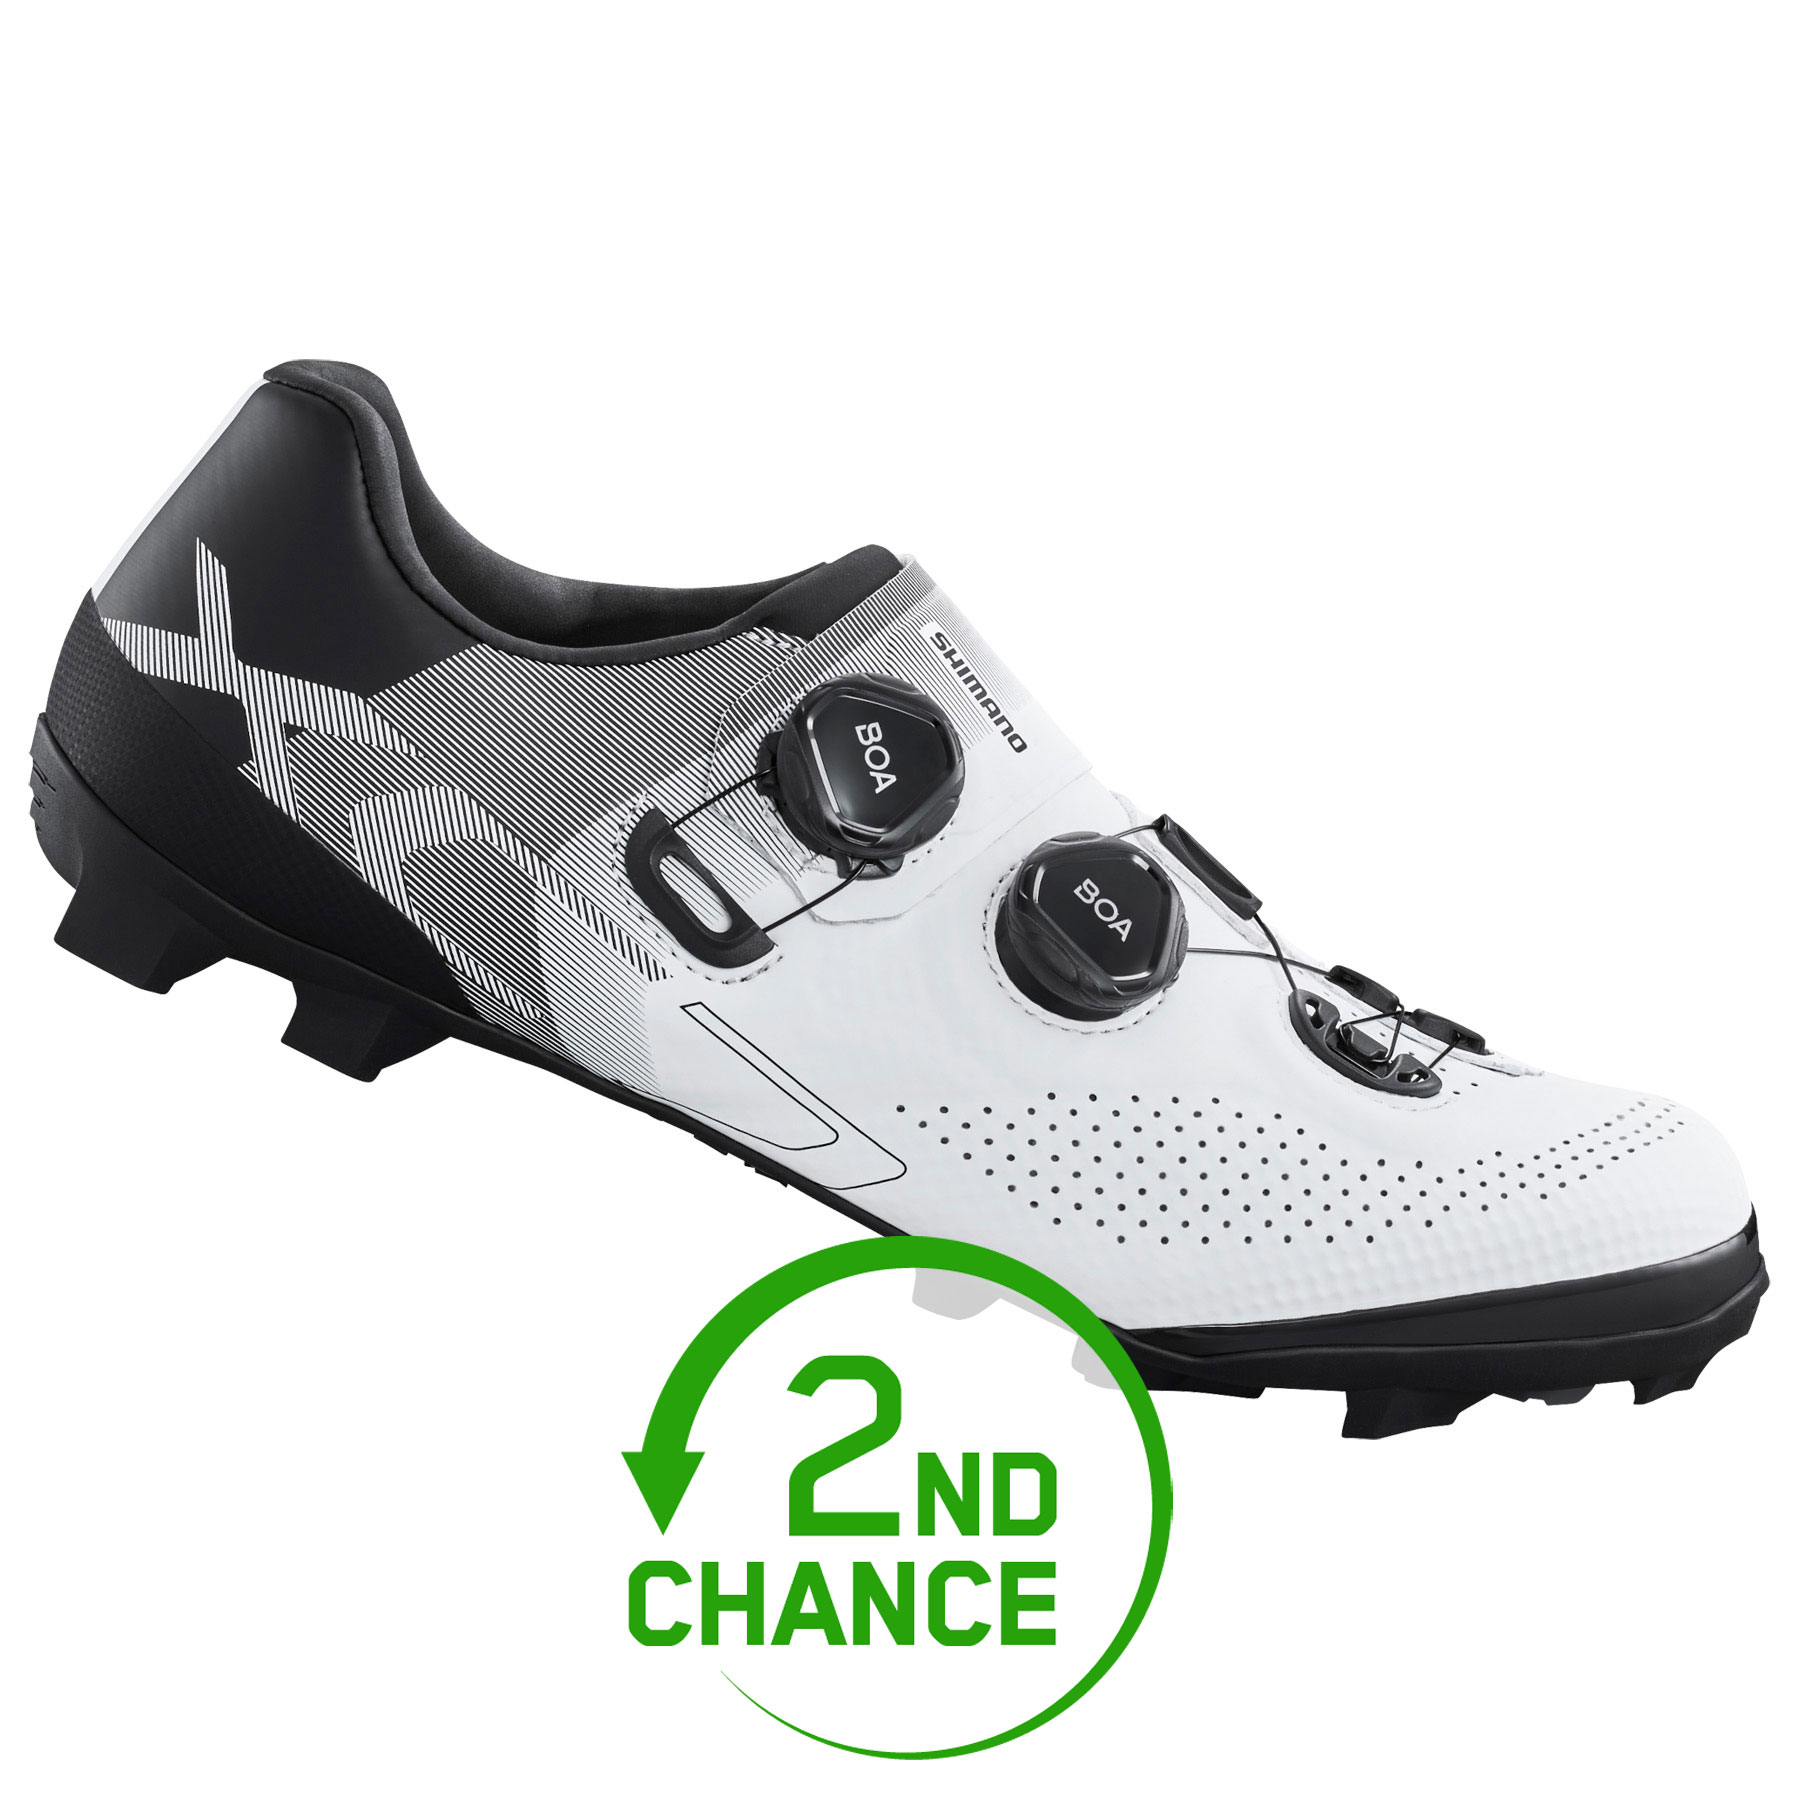 Picture of Shimano SH-XC702 Cycling Shoes Men - Wide - white - 2nd Choice